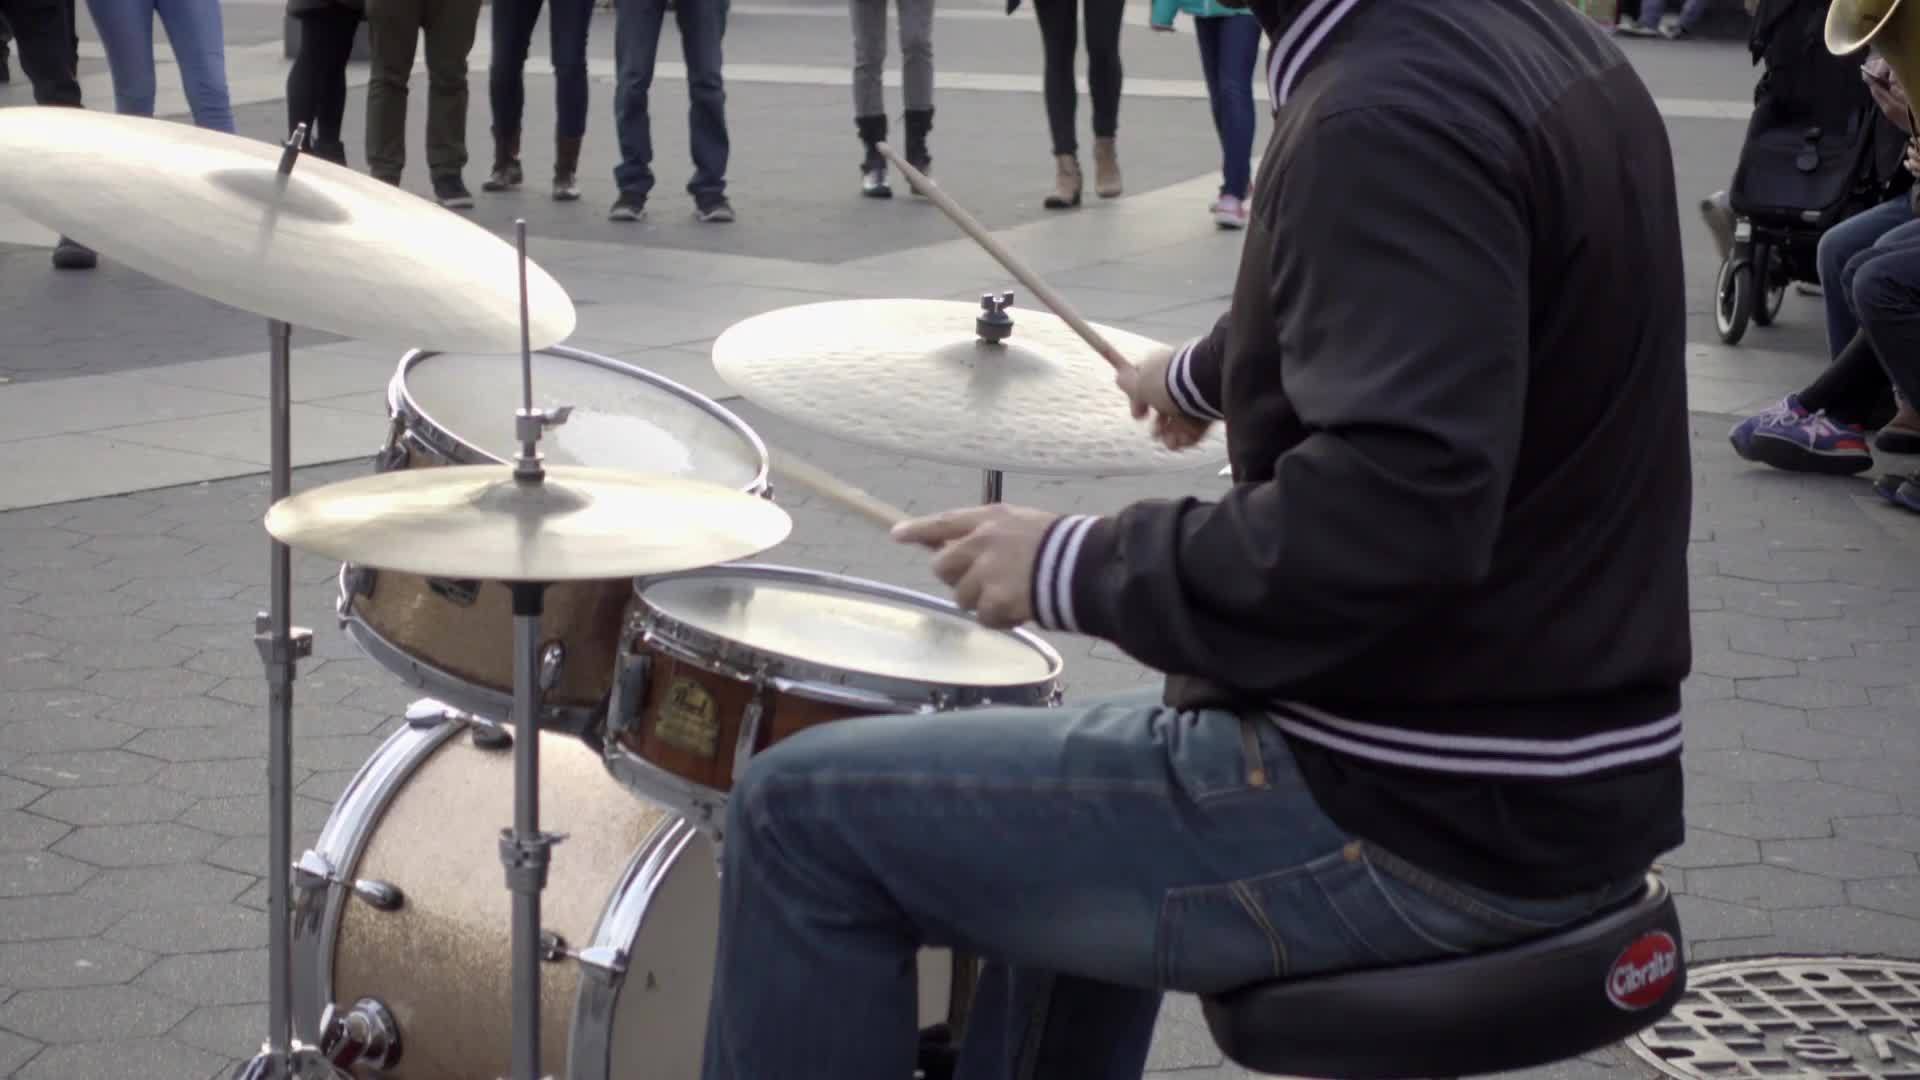 drummer playing music with band musicians - drumming in Washington Square Park on cold fall day - Manhattan New York City NYC